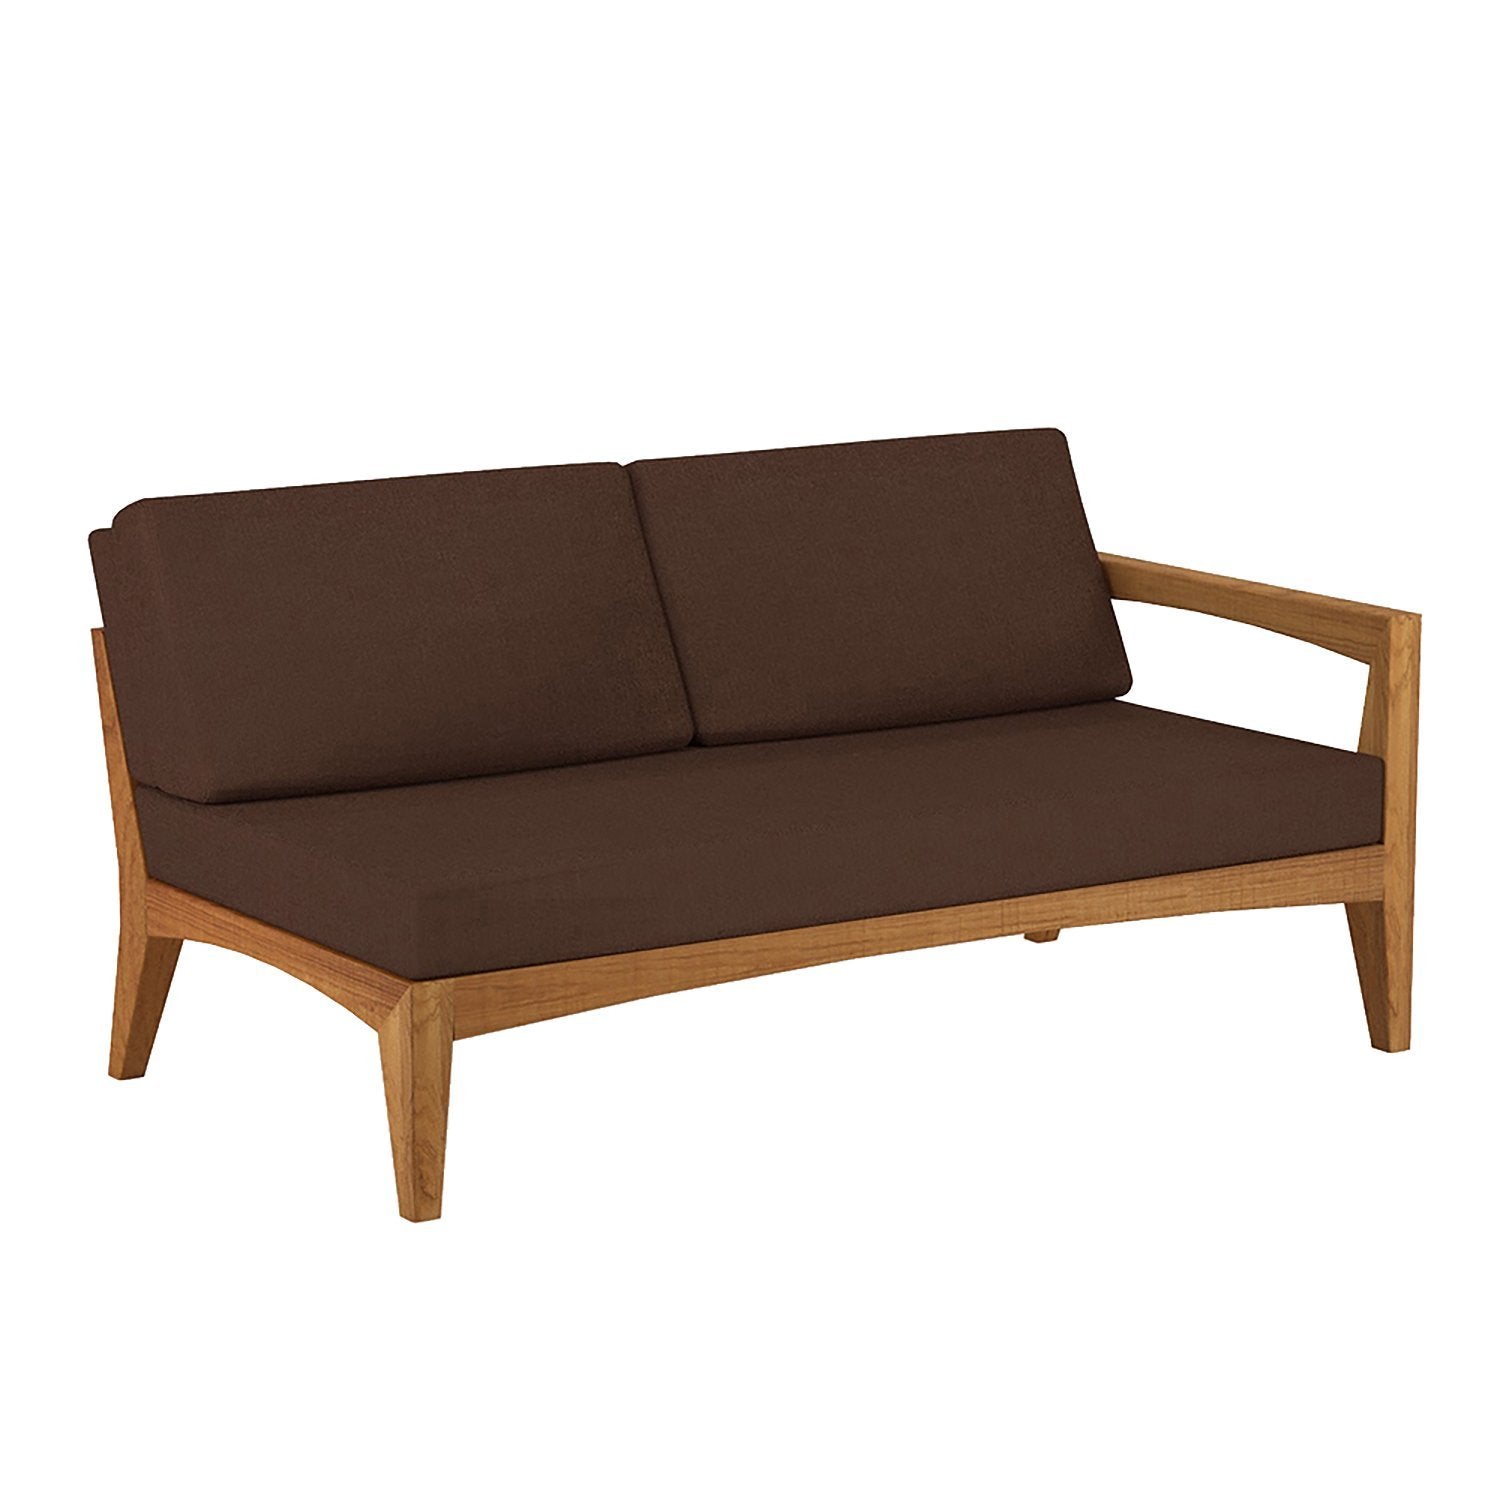 Zenhit Two Seater Outdoor Sofa 160L